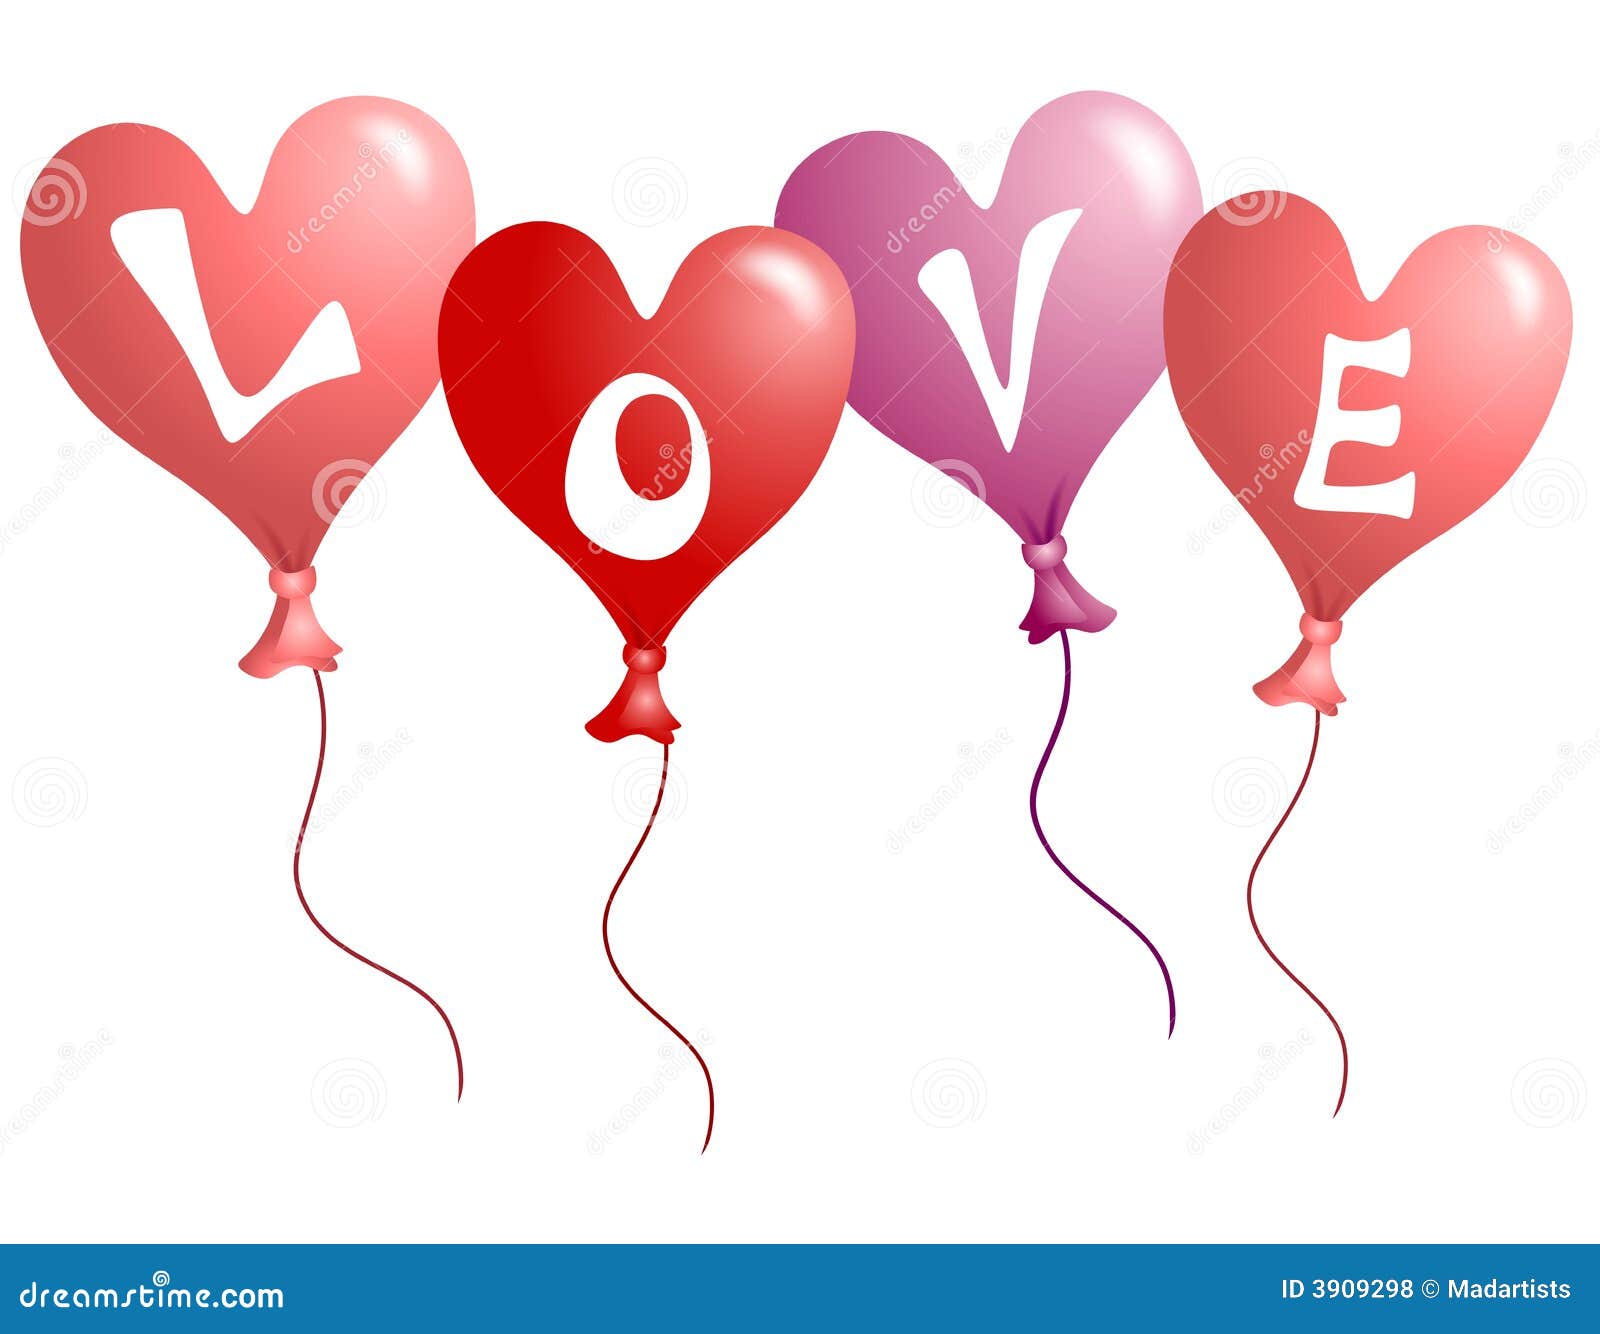 clip art illustration featuring 4 heart shaped Valentine's Day ...